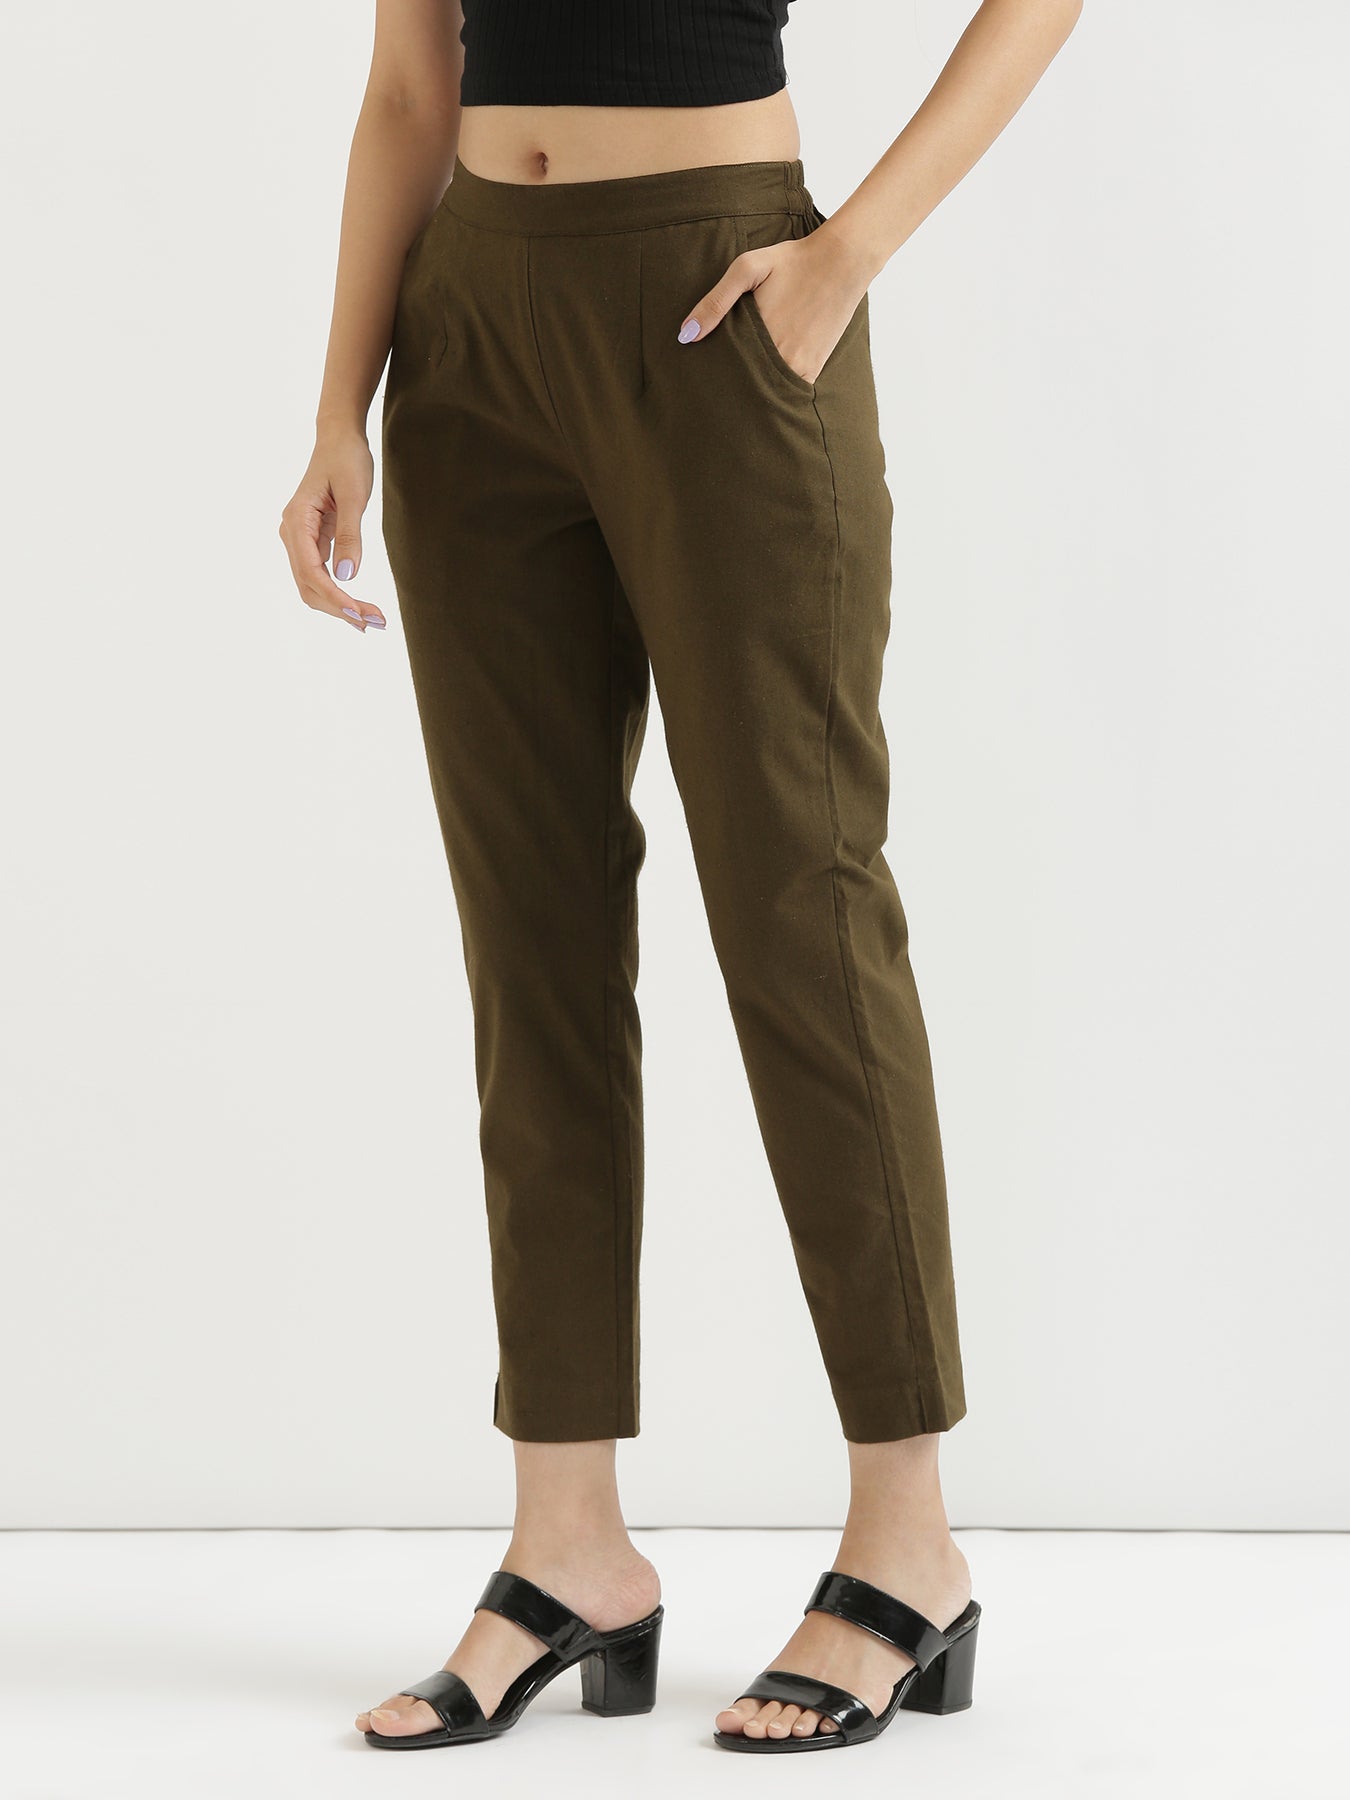 Buy Olive Green Trousers & Pants for Men by JADE BLUE Online | Ajio.com